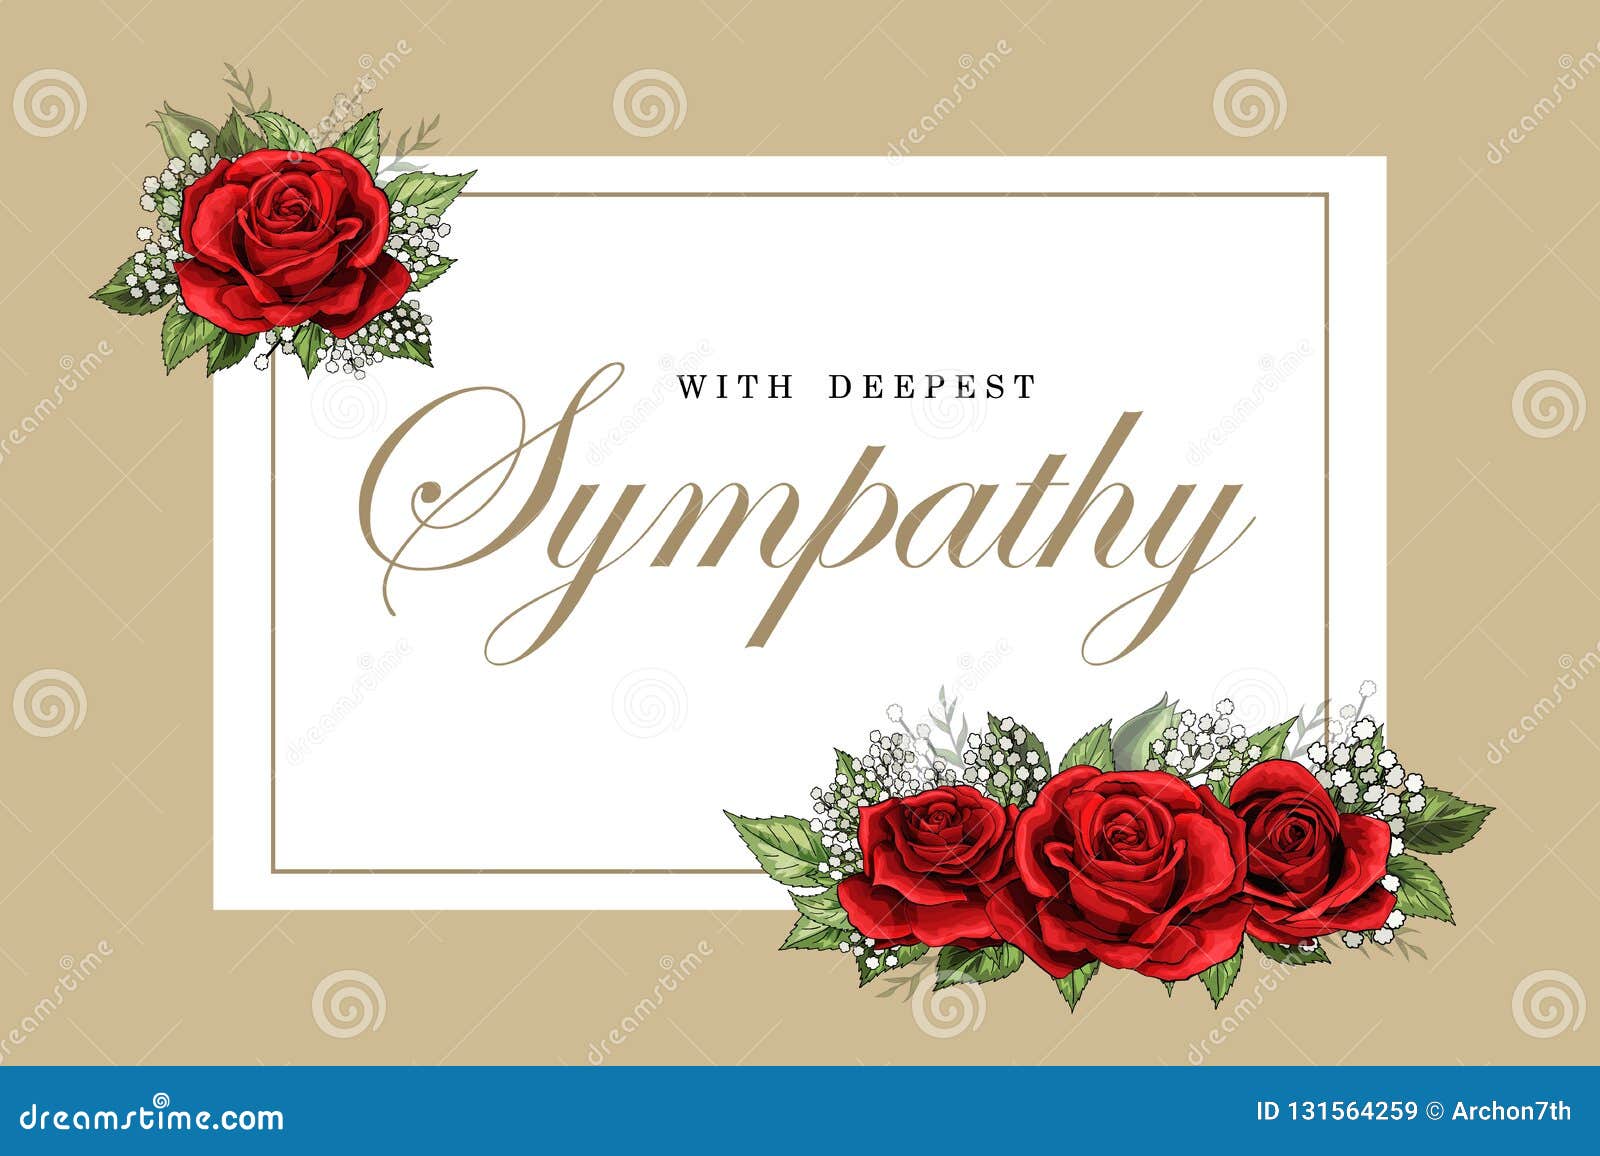 Condolences Stock Illustrations – 23 Condolences Stock Throughout Sorry For Your Loss Card Template